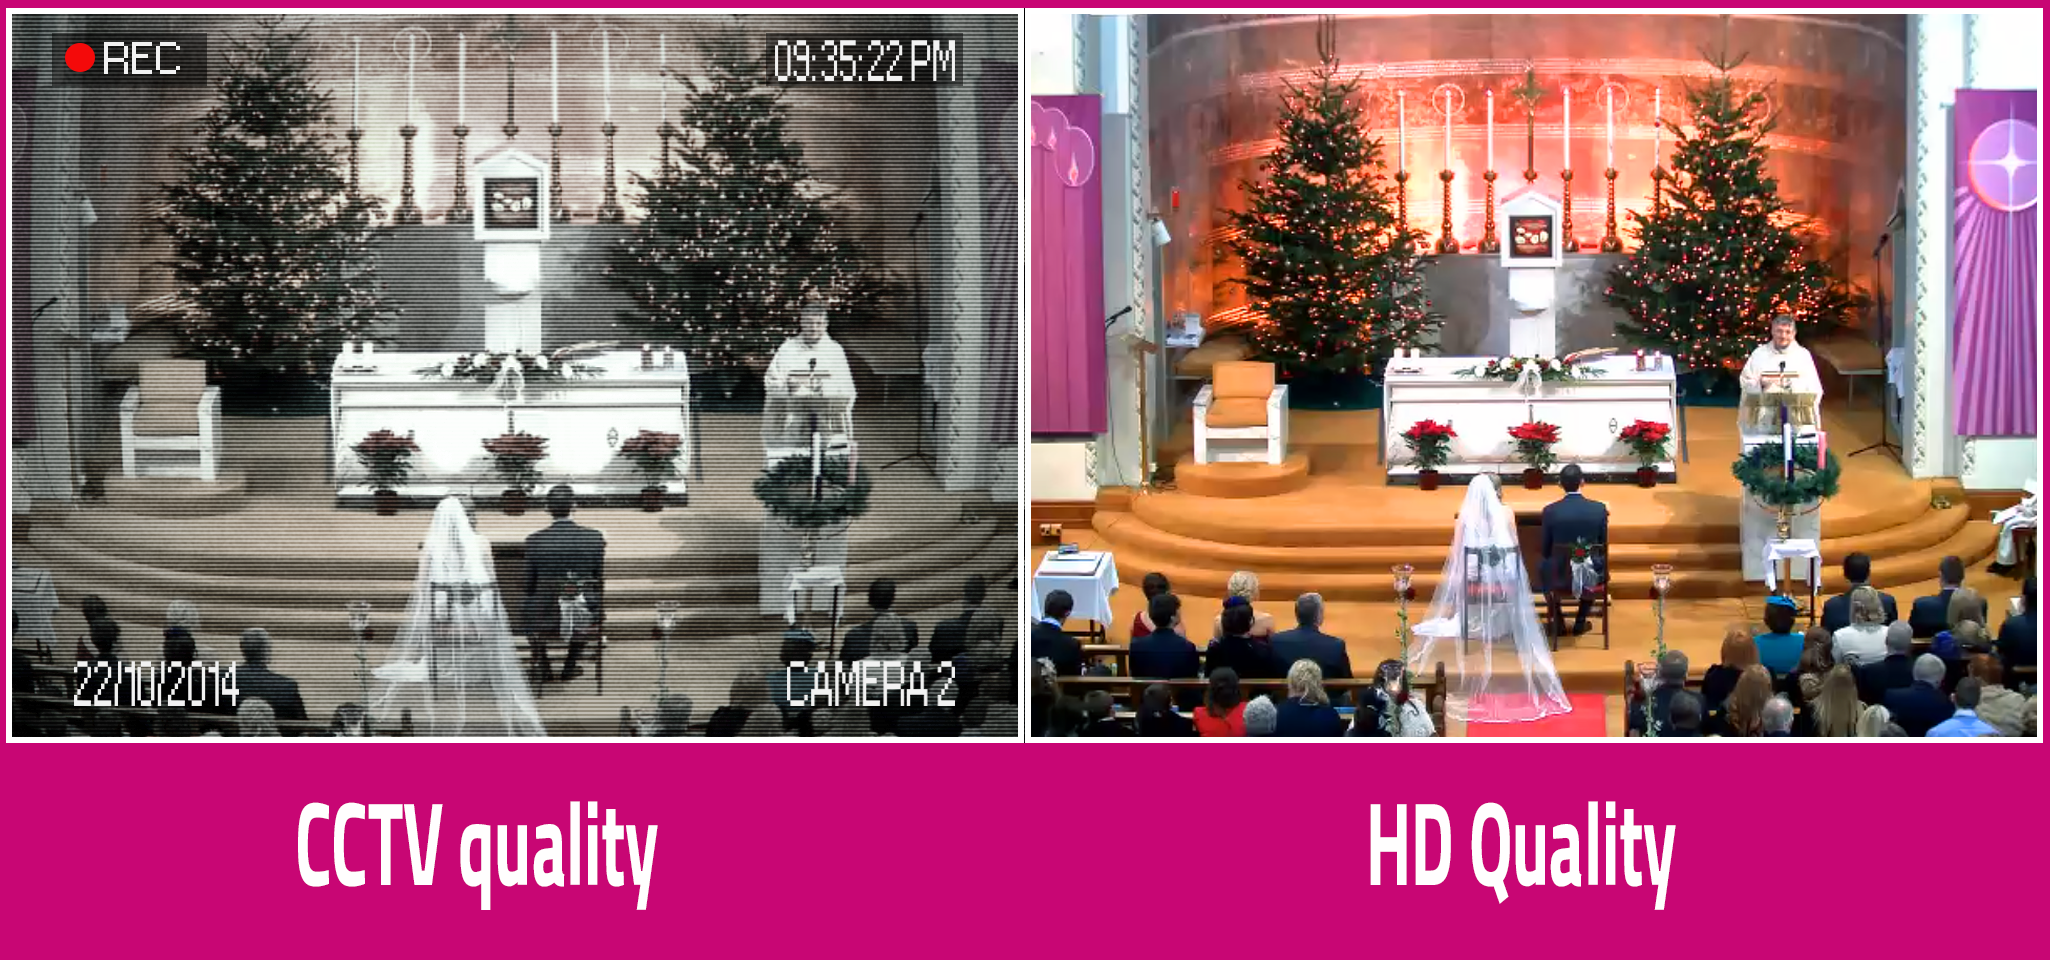 HD Live streaming Church Services